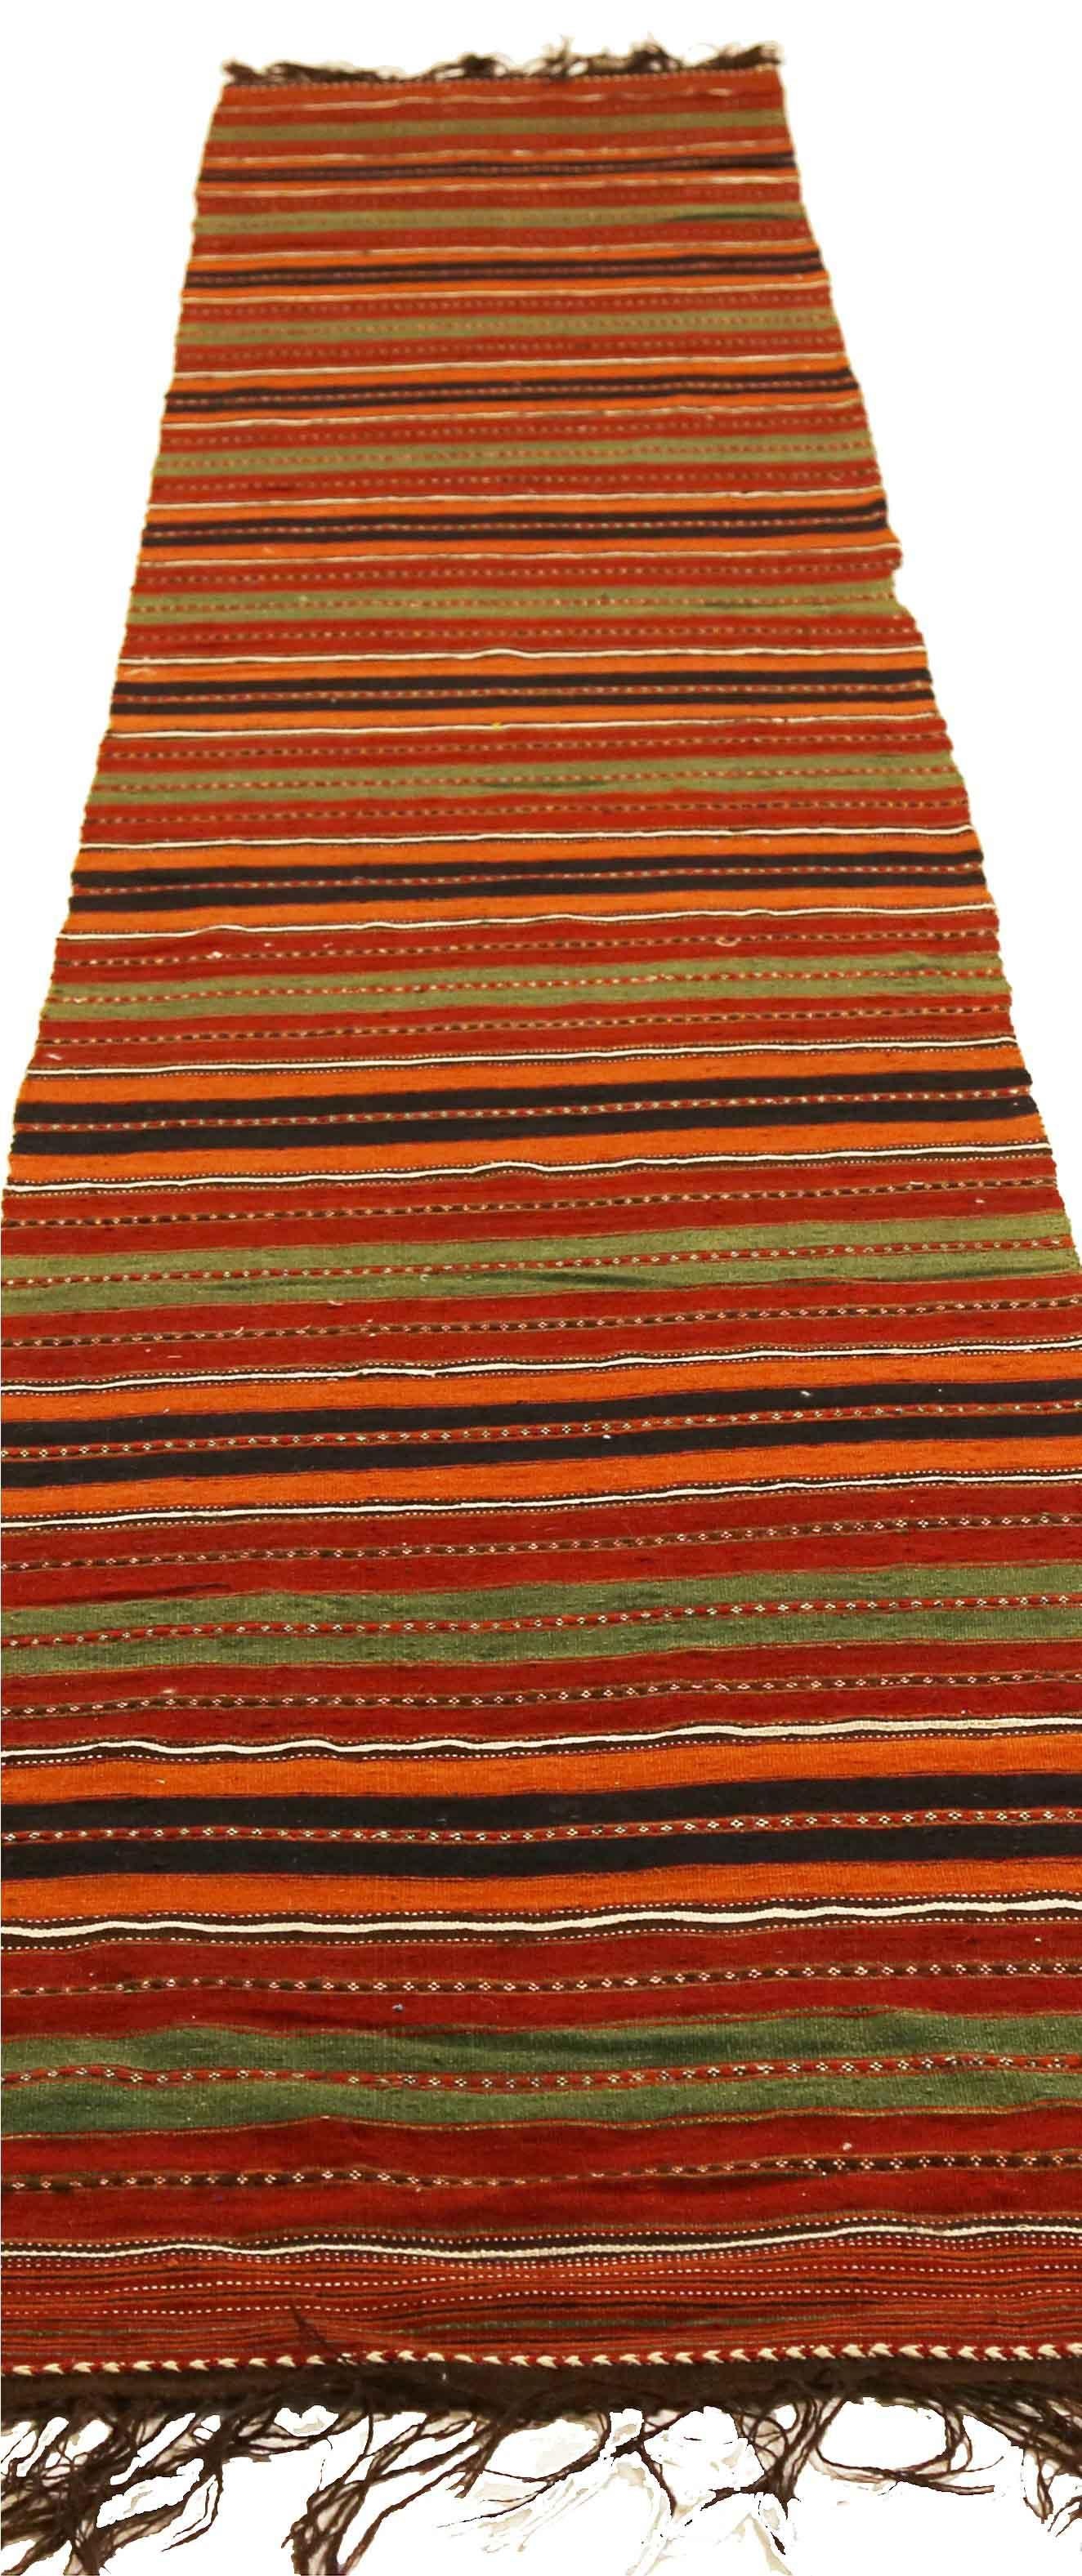 Antique handmade Persian runner rug from high quality sheep’s wool and colored with eco-friendly vegetable dyes that are proven safe for humans and pets alike. It’s a Classic Kilim design showcasing red and orange stripes on a regal brown field.